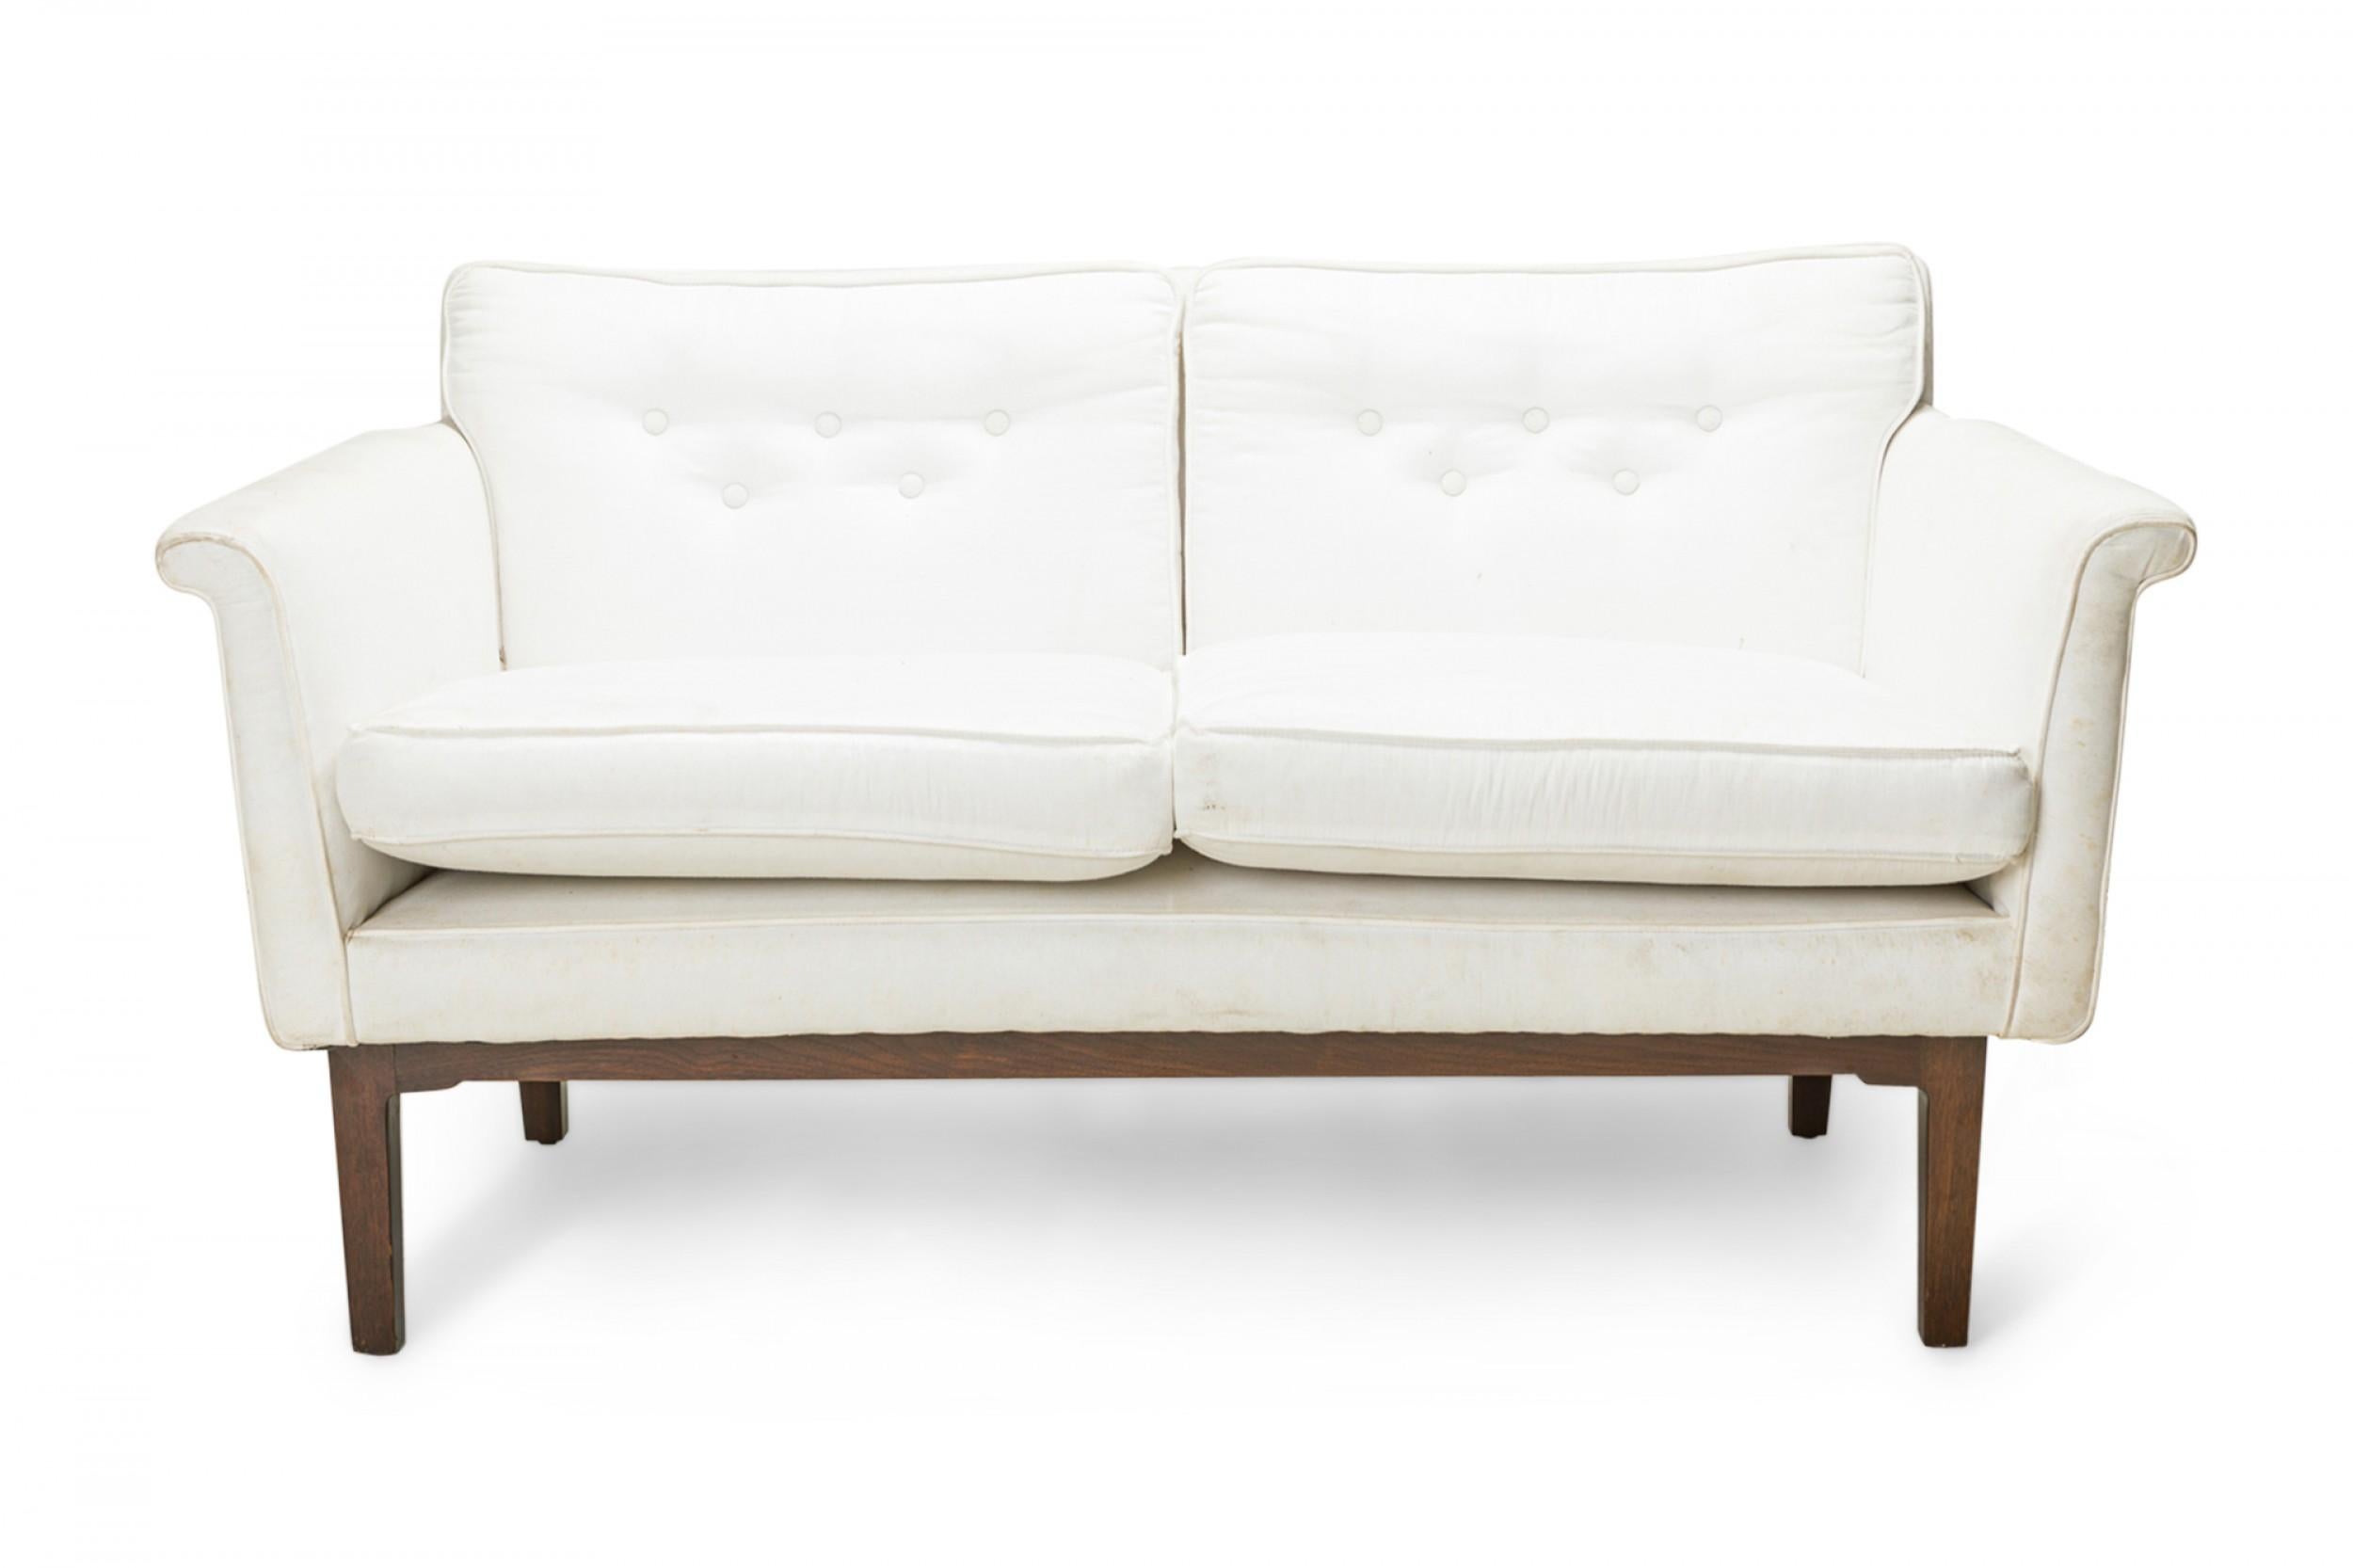 Edward Wormley for Dunbar Furniture Co. White Upholstered Settee